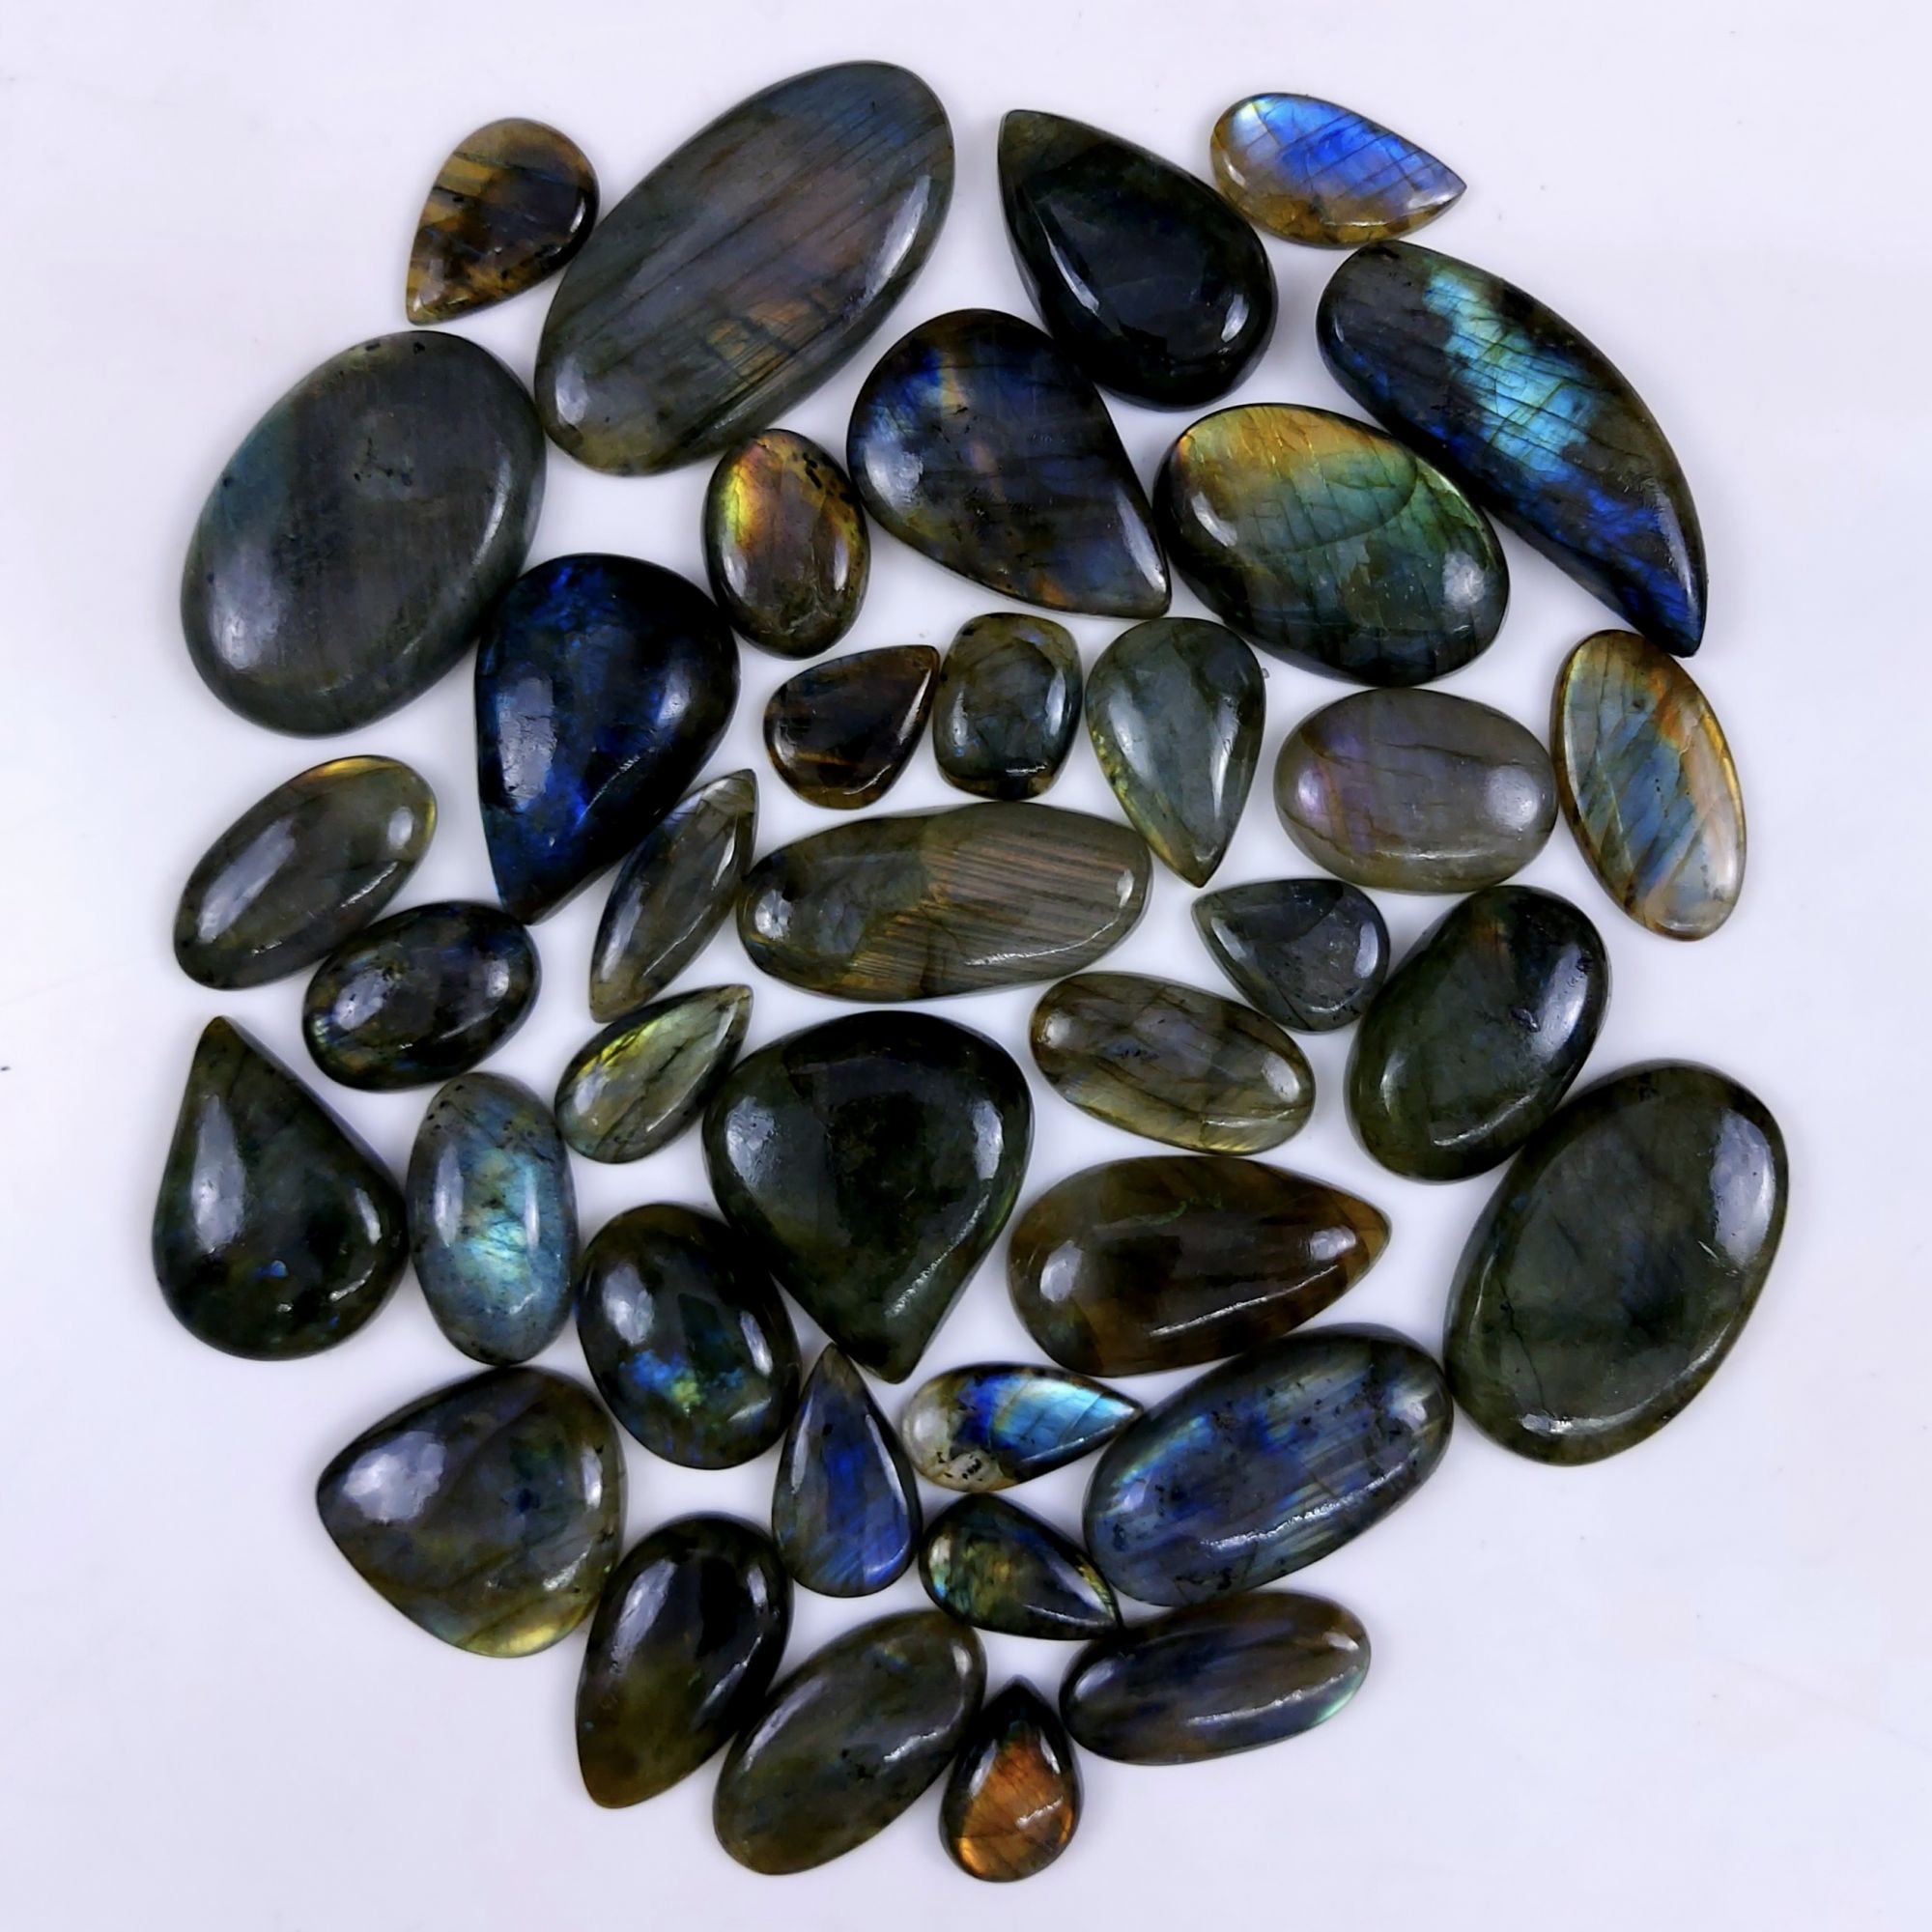 38pc 1550Cts Labradorite Cabochon Multifire Healing Crystal For Jewelry Supplies, Labradorite Necklace Handmade Wire Wrapped Gemstone Pendant 46x32 20x15mm#6319